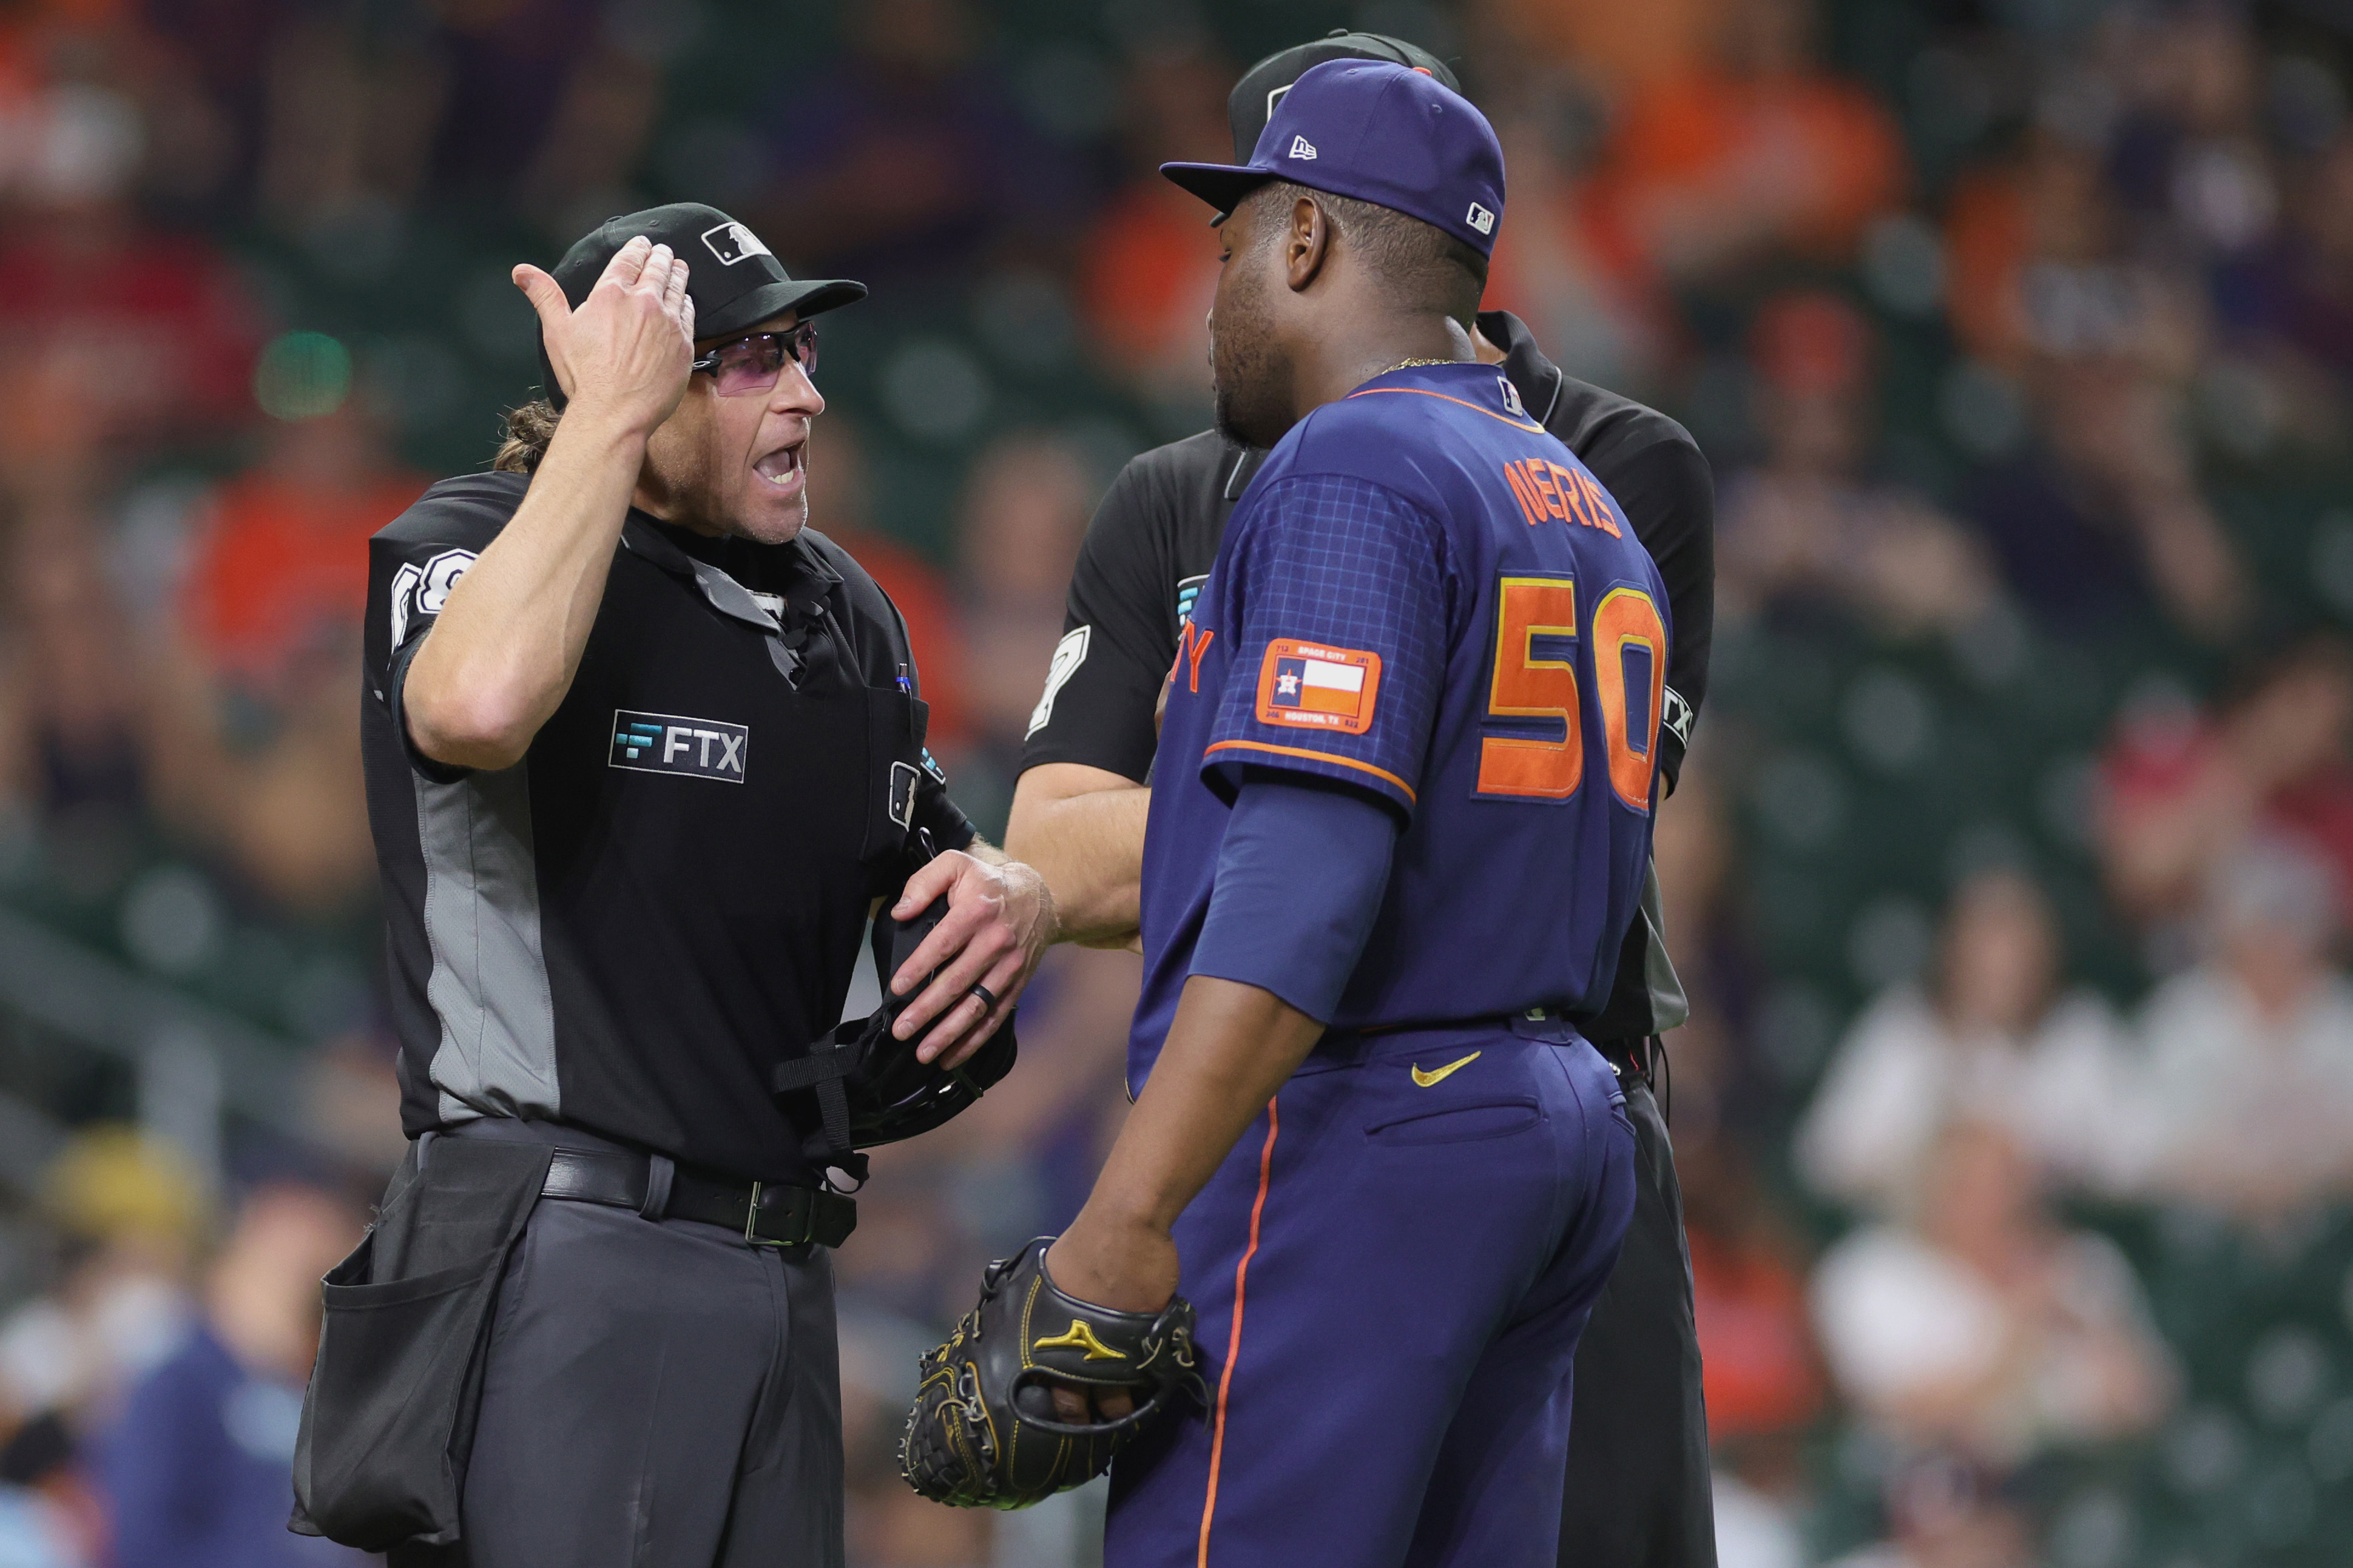 Astros' Neris shouts at Mariners' Rodríguez after strikeout